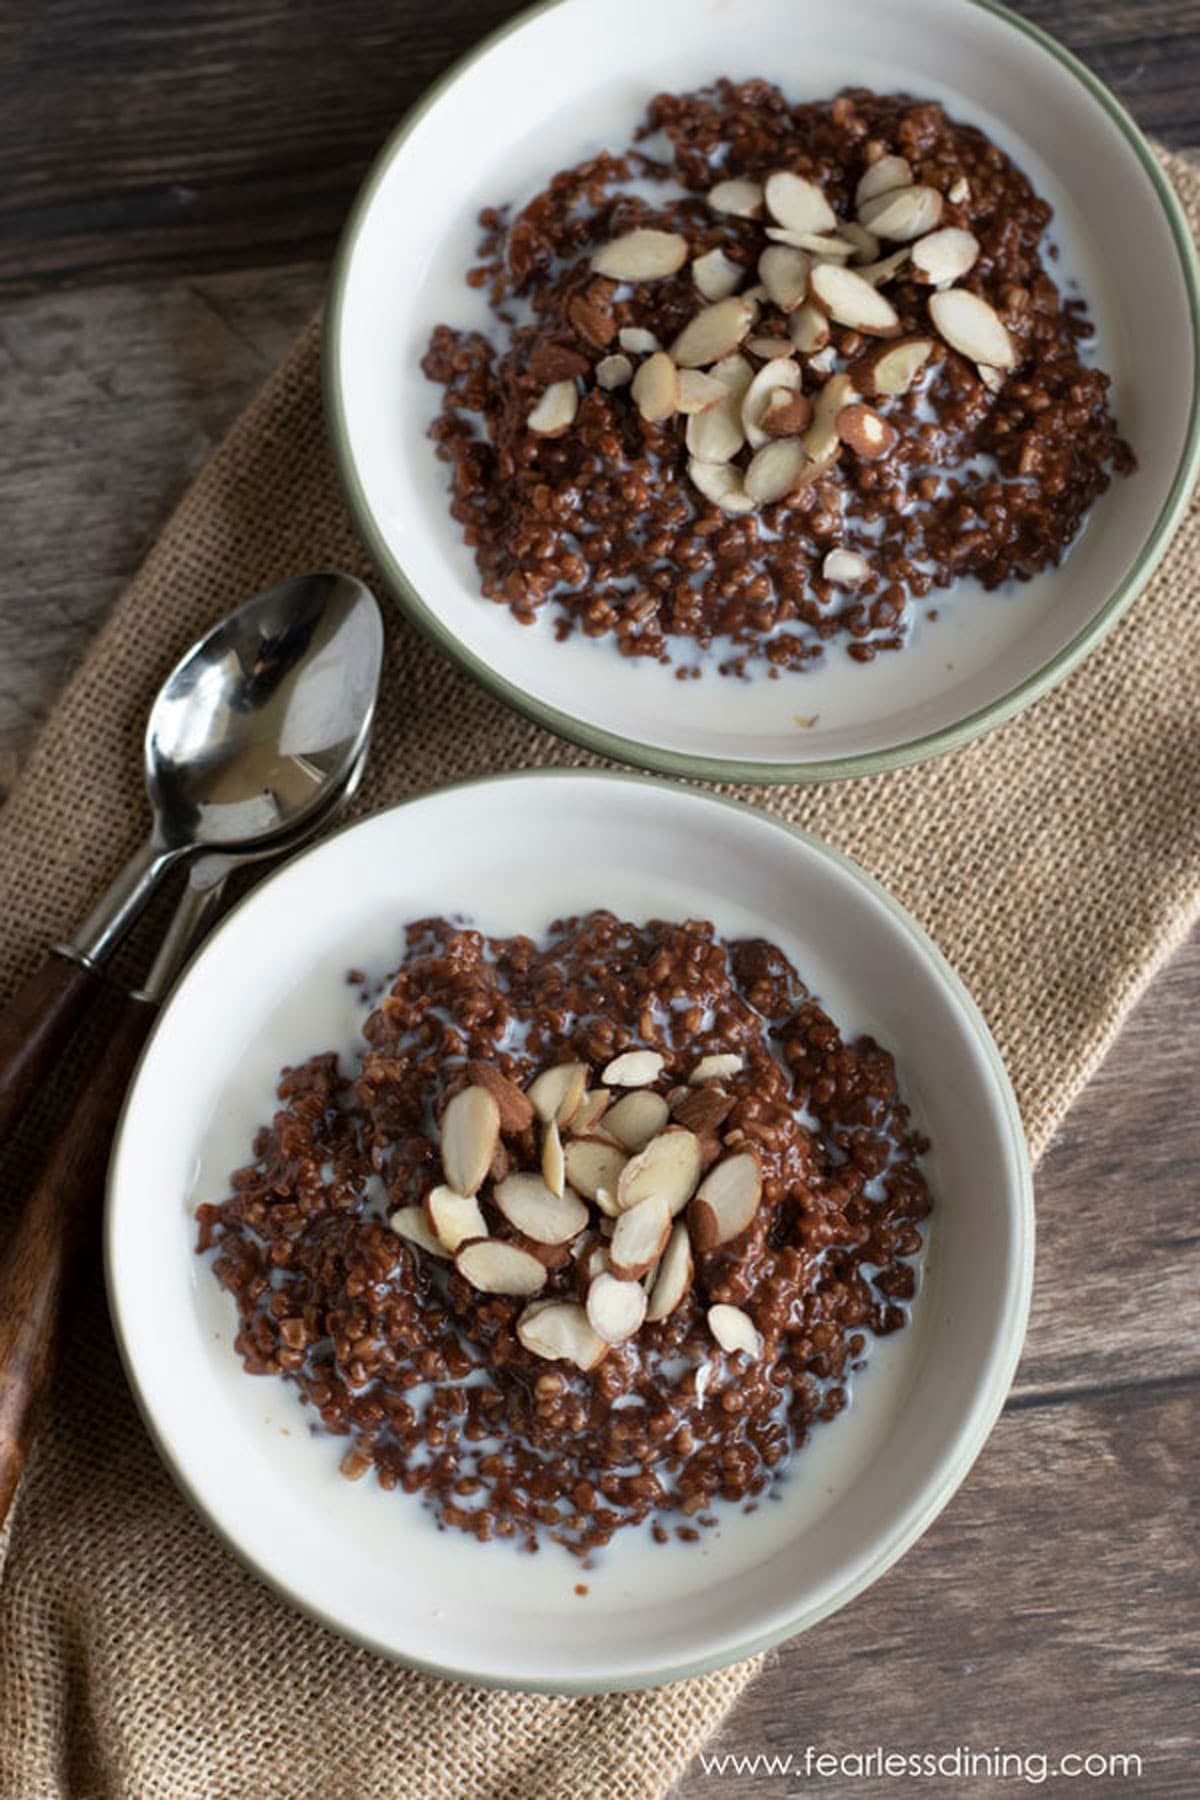 Two bowls filled with chocolate steel cut oats. Both are topped with slivered almonds.